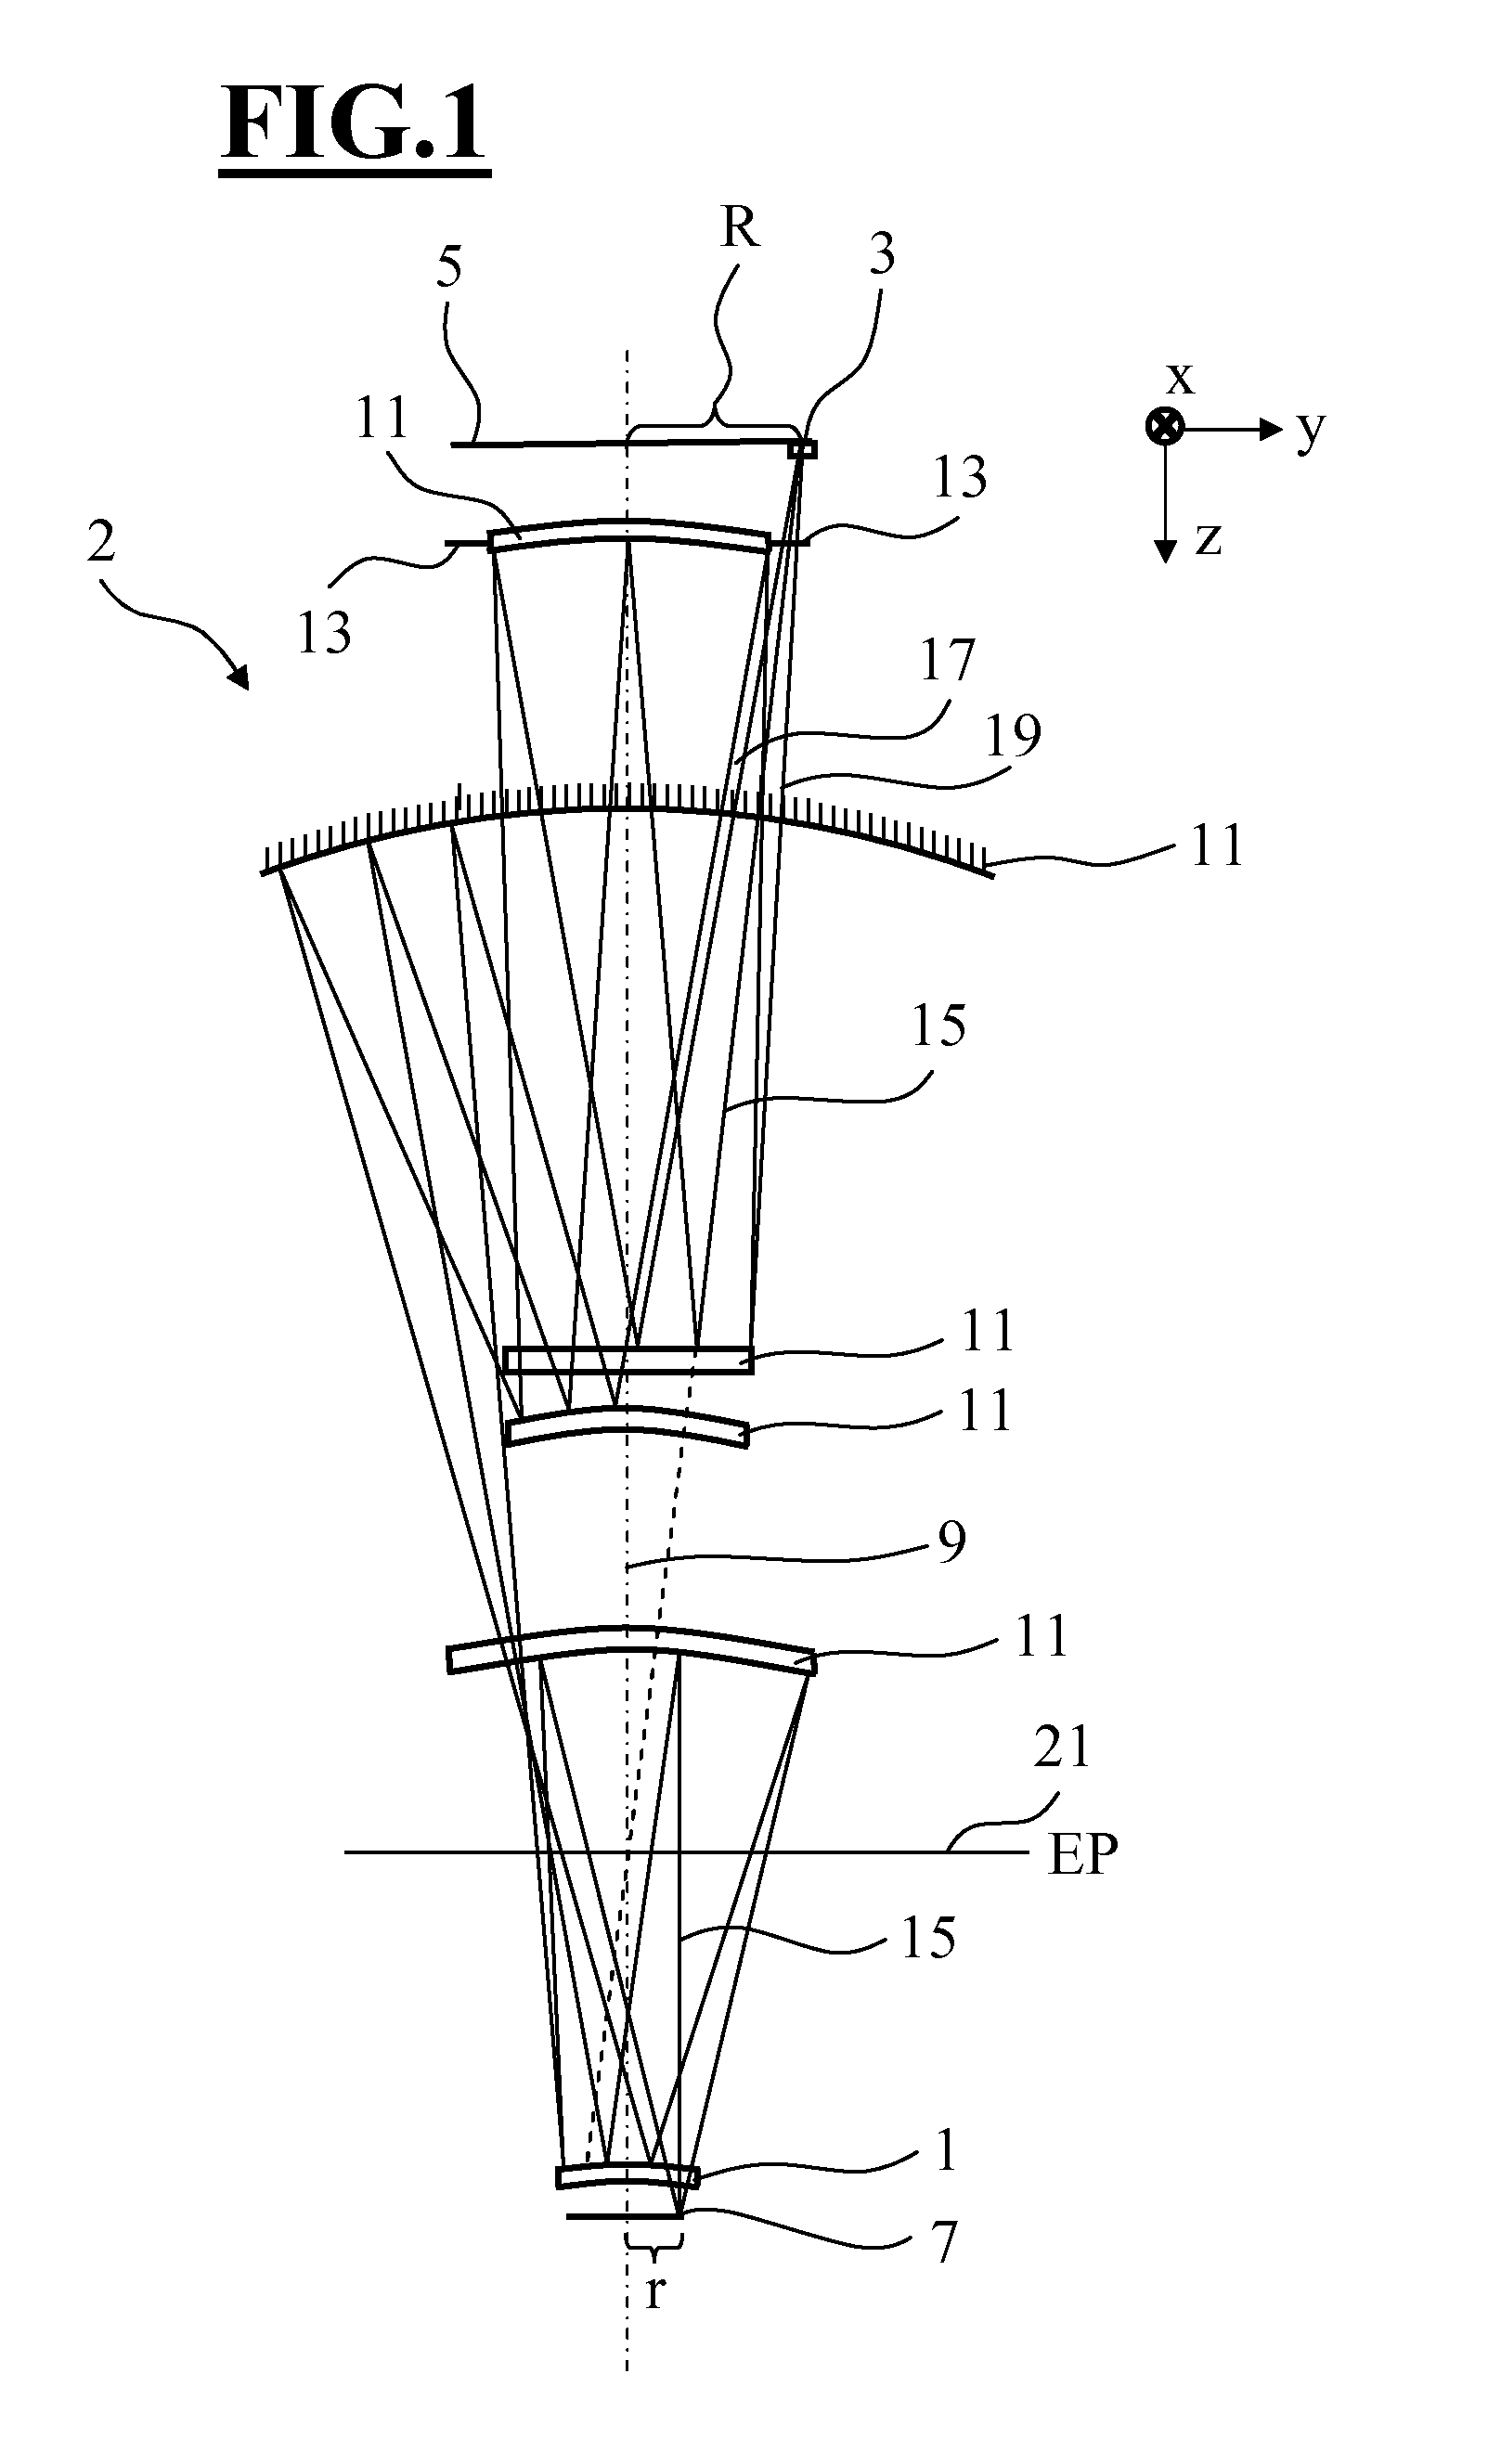 Reflective Optical Element for the EUV Wavelength Range, Method for Producing and for Correcting Such an Element, Projection Lens for Microlithography Comprising Such an Element, and Projection Exposure Apparatus for Microlithography Comprising Such a Projection Lens